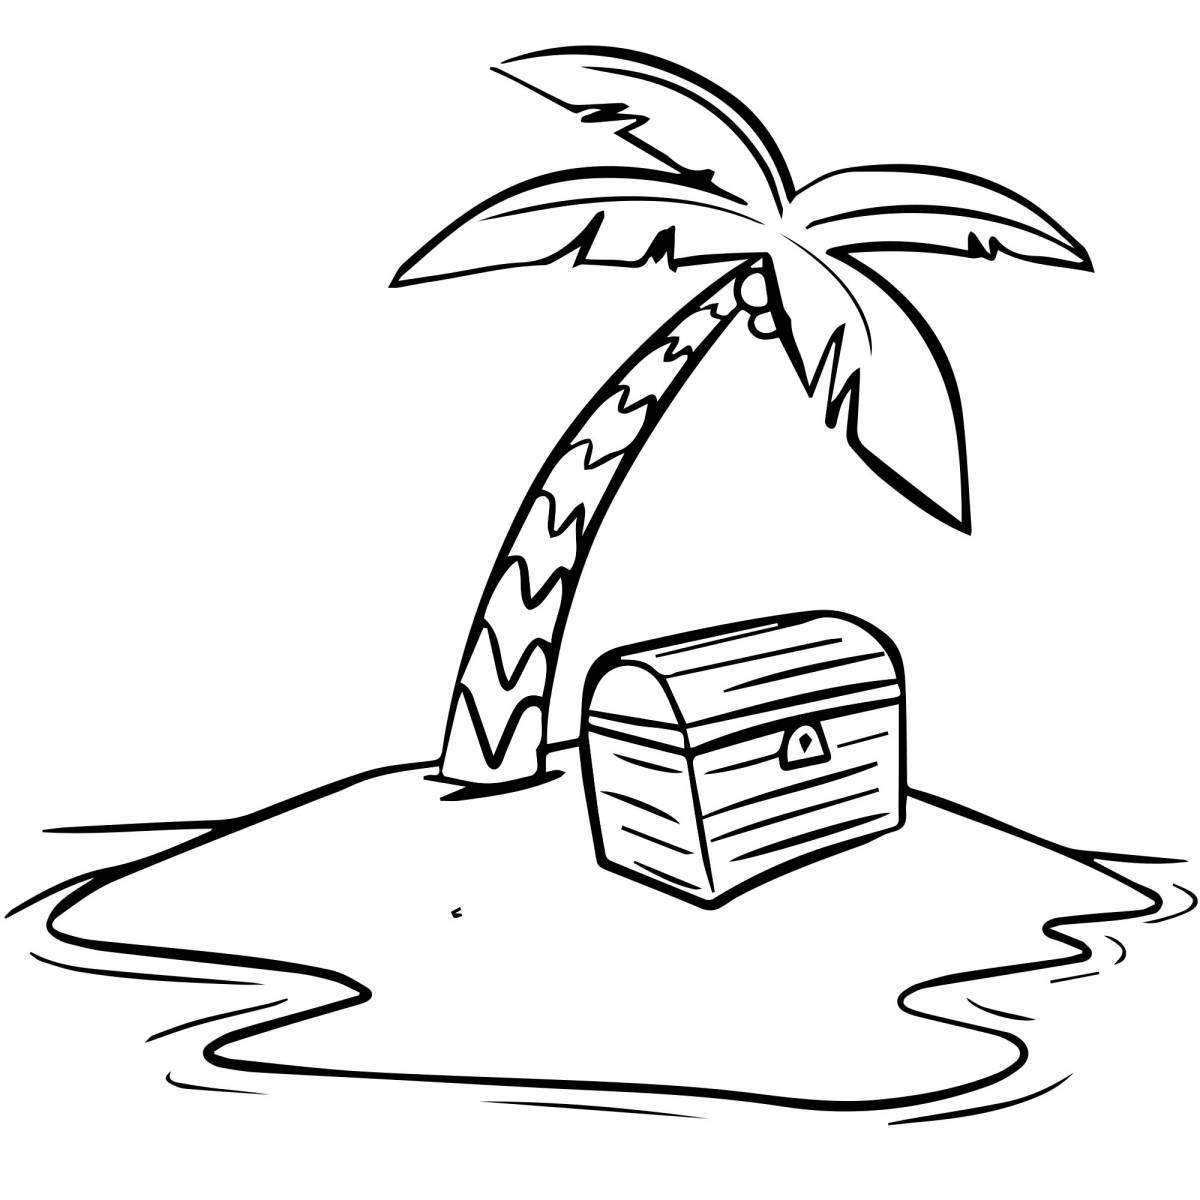 Coloring page nice island for kids